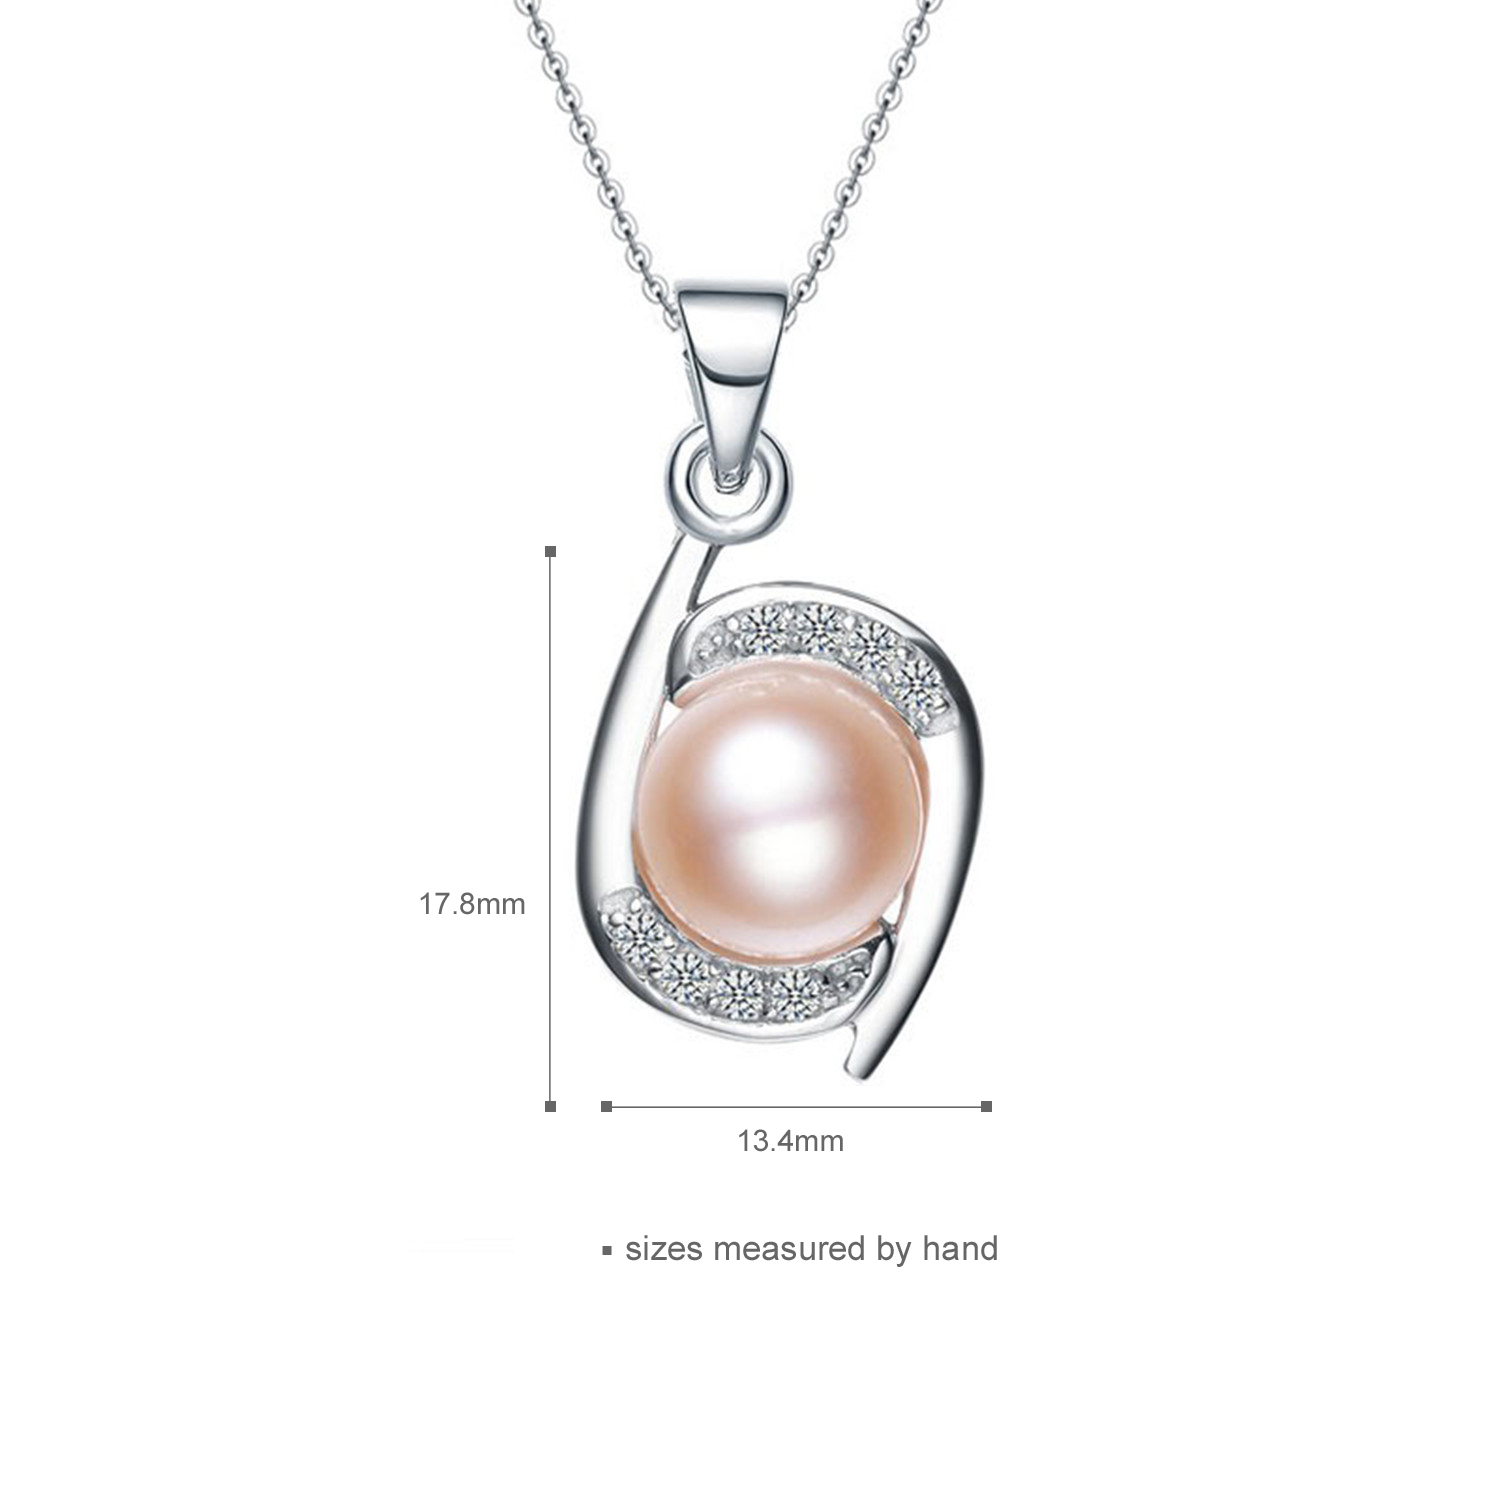 Wholesale Sterling Silver Necklace Jewelry Cross Chain Pink White Pearl Pendant Necklace Women(图2)